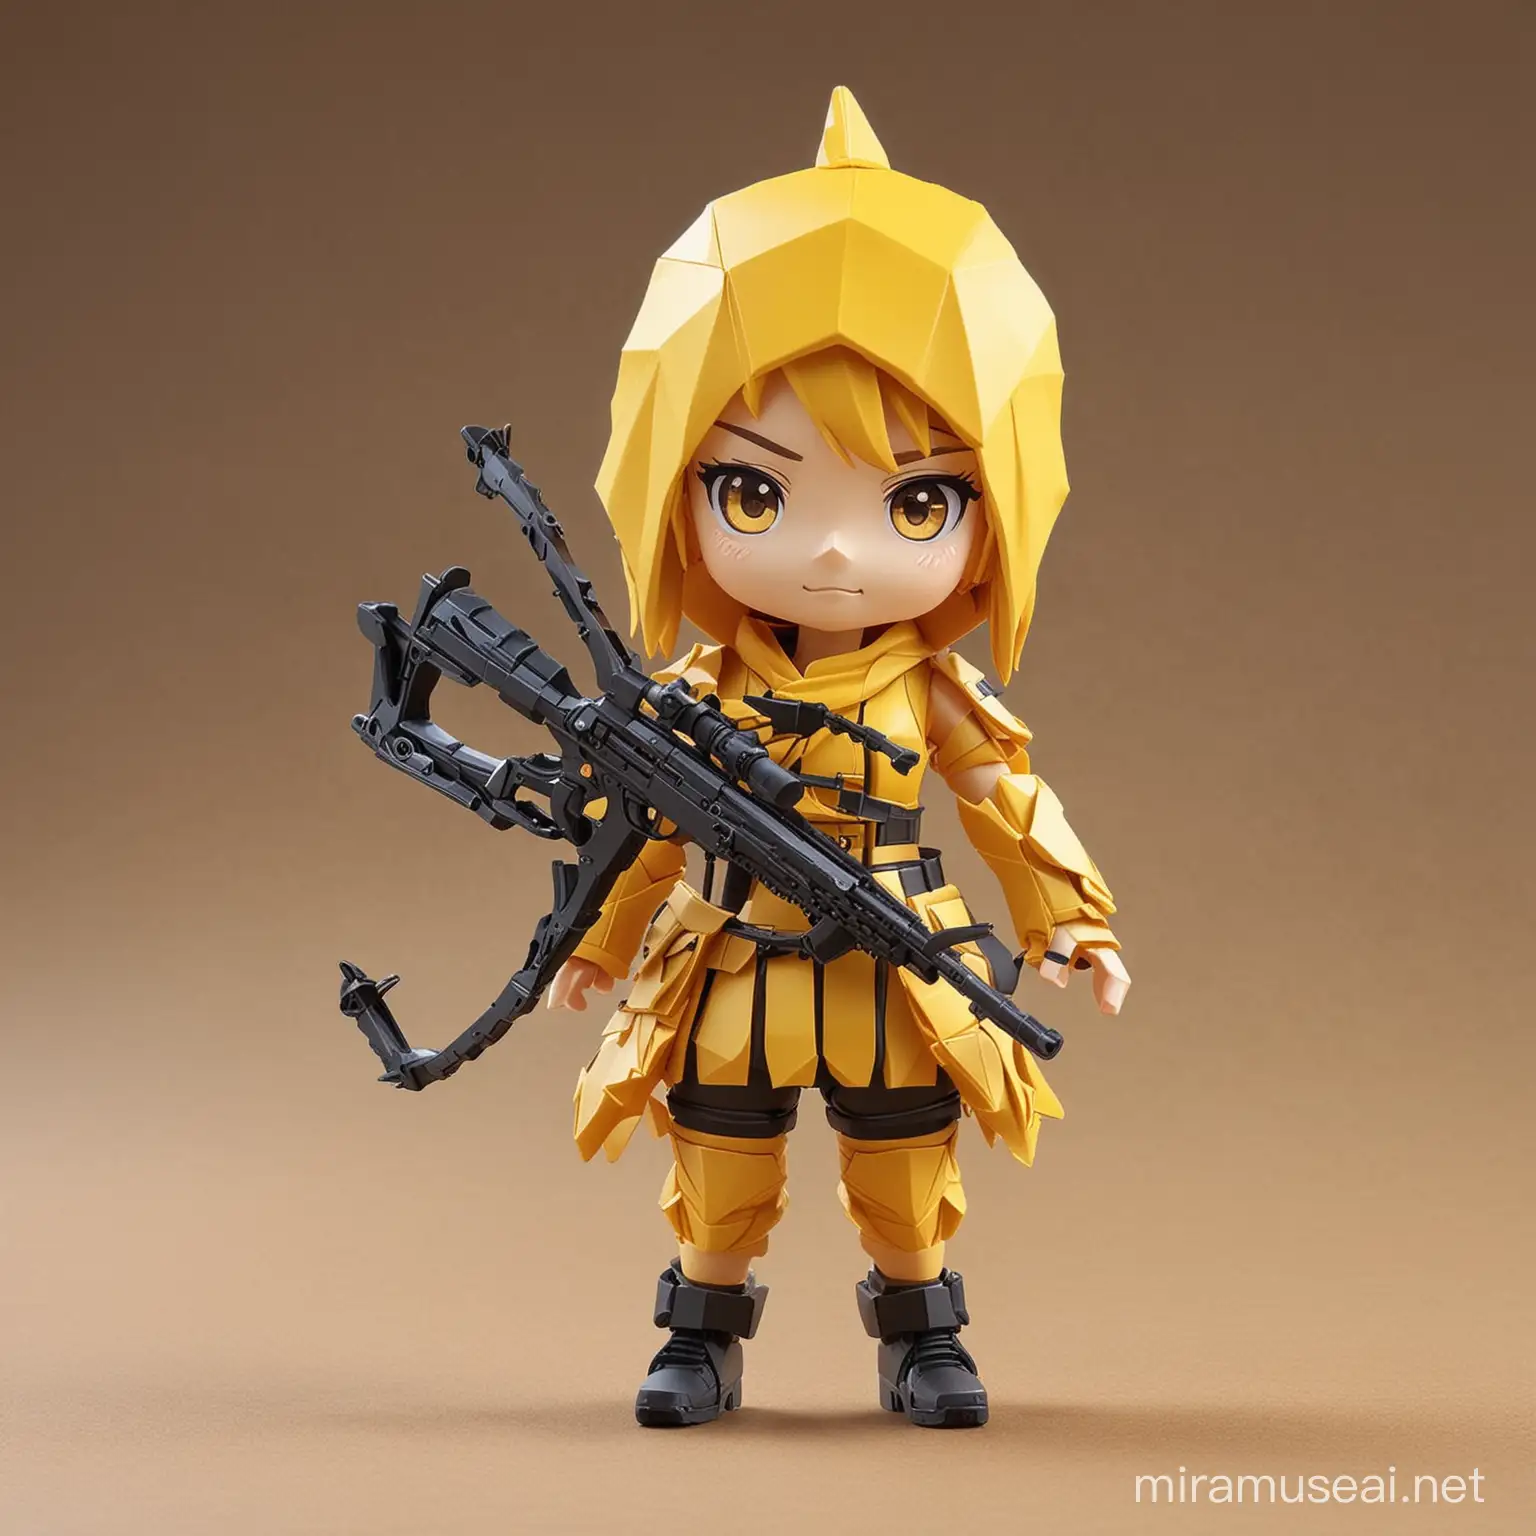 3d Origami style crossbow sniper AI yellow Chibi action figure